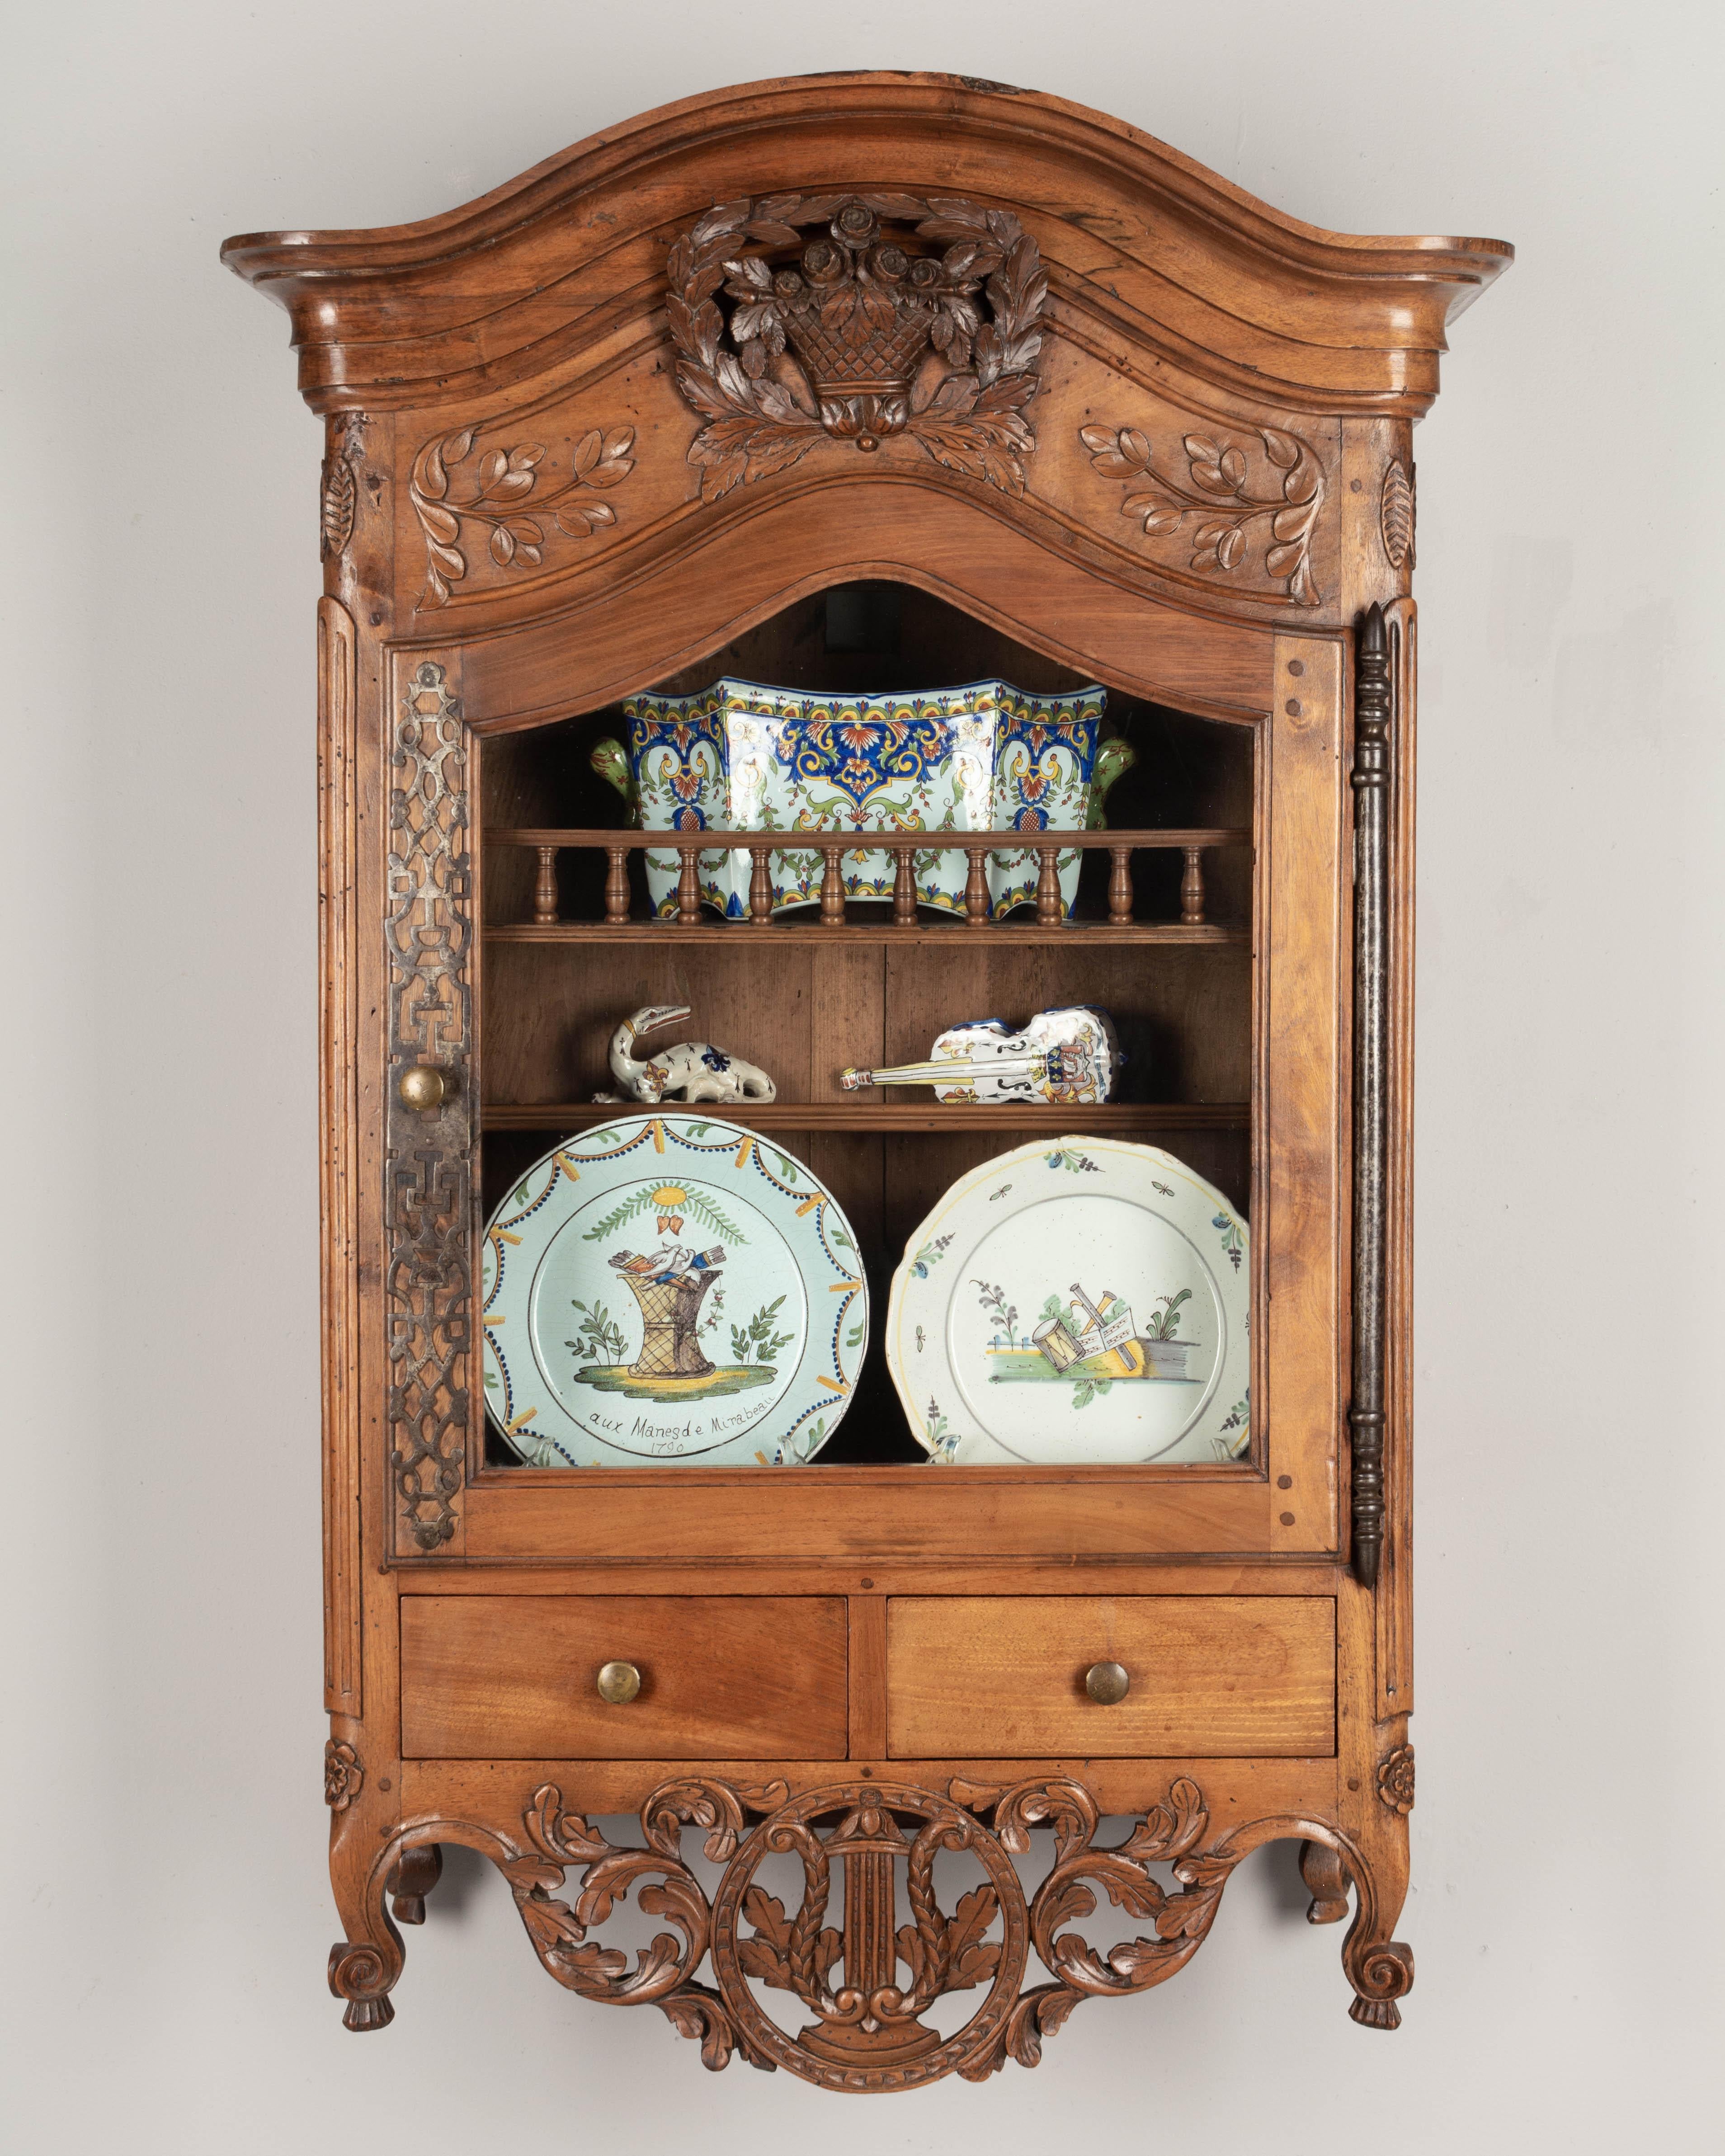 A late 18th century Louis XV style French Provençal verrio, or wall display cabinet from Nîmes. Made of solid walnut with beautifully carved details including a three dimensional basket of roses framed by a laurel wreath and a pierced apron with an